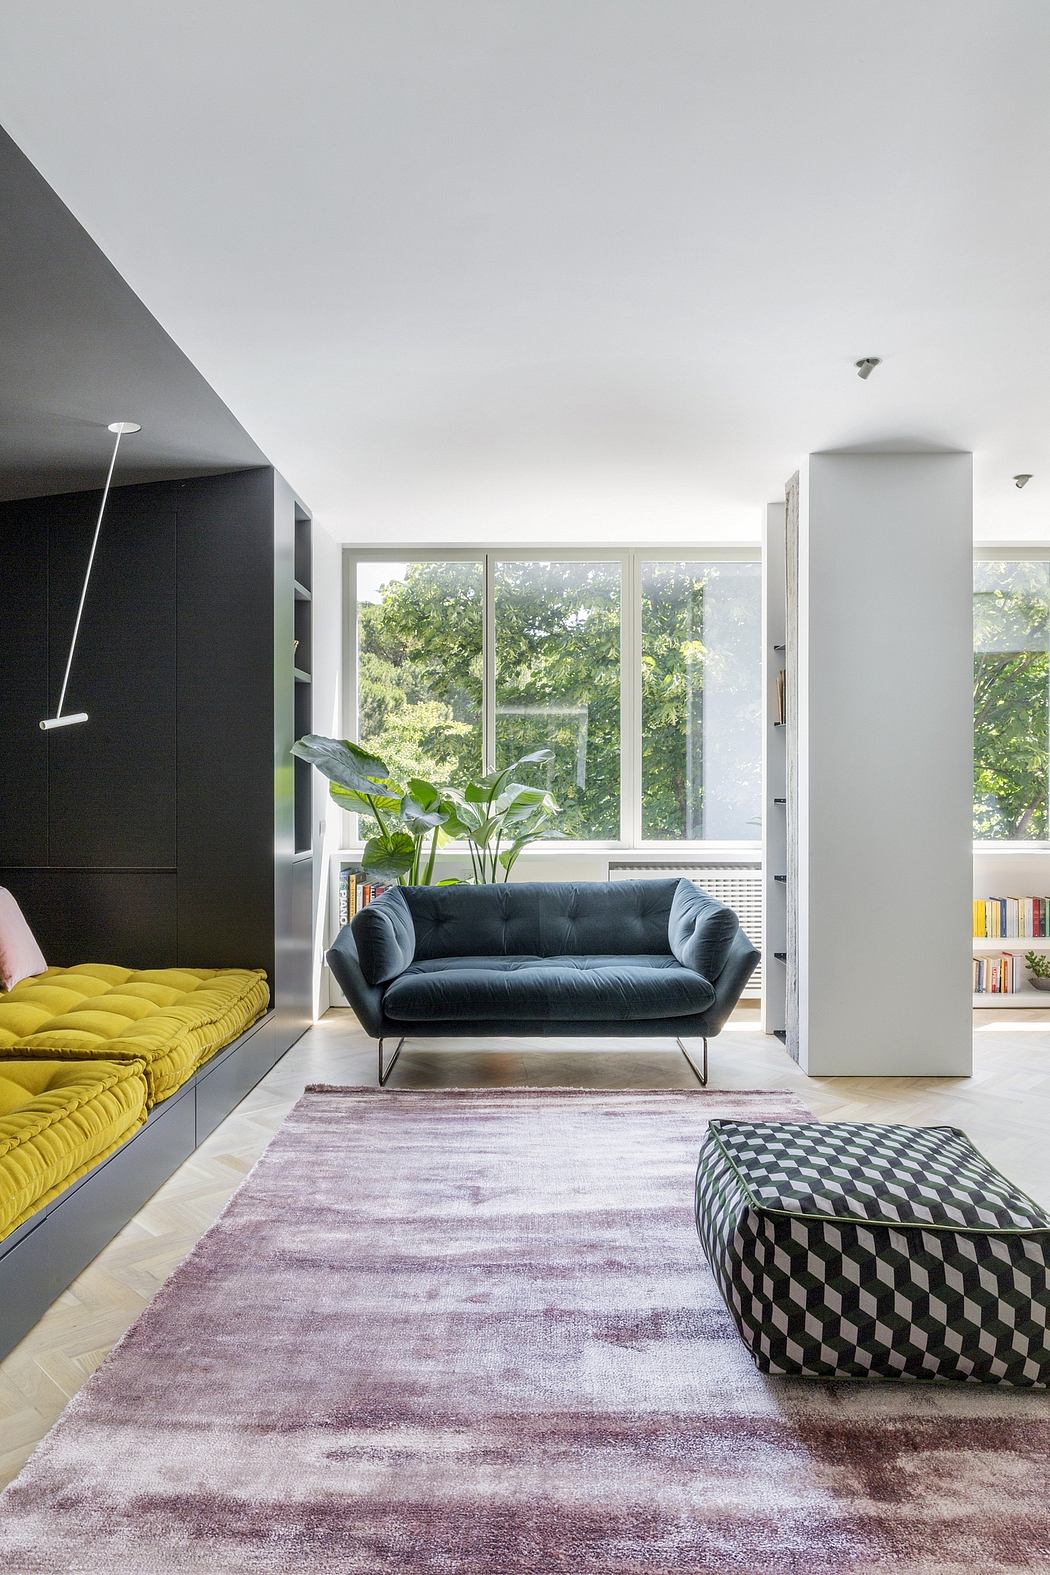 Large windows, sleek black and white furniture, pops of yellow and geometric accents.